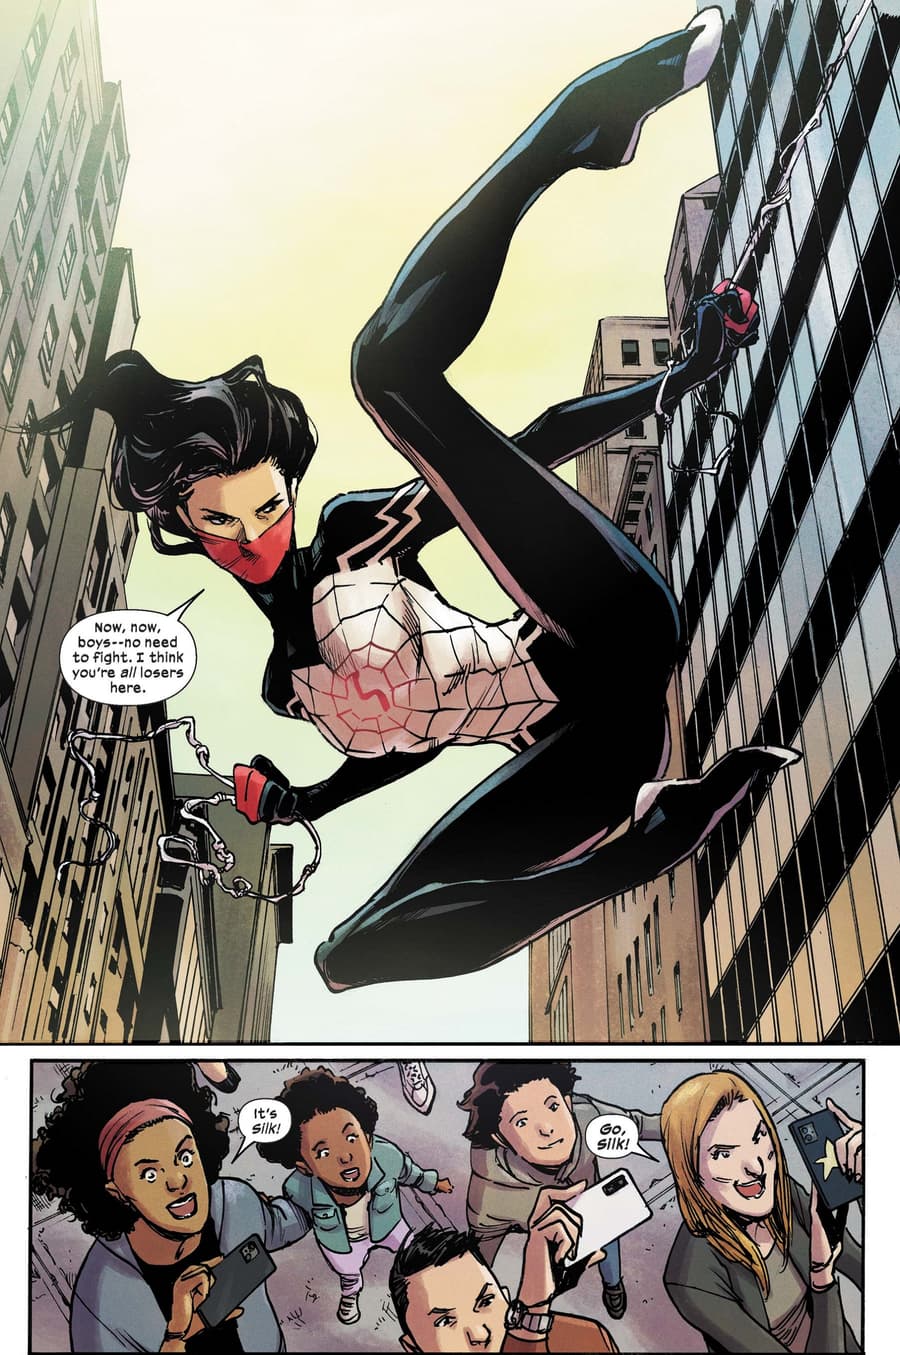 Preview page from SILK (2022) #1 with art by Takeshi Miyazawa and Ian Herring.